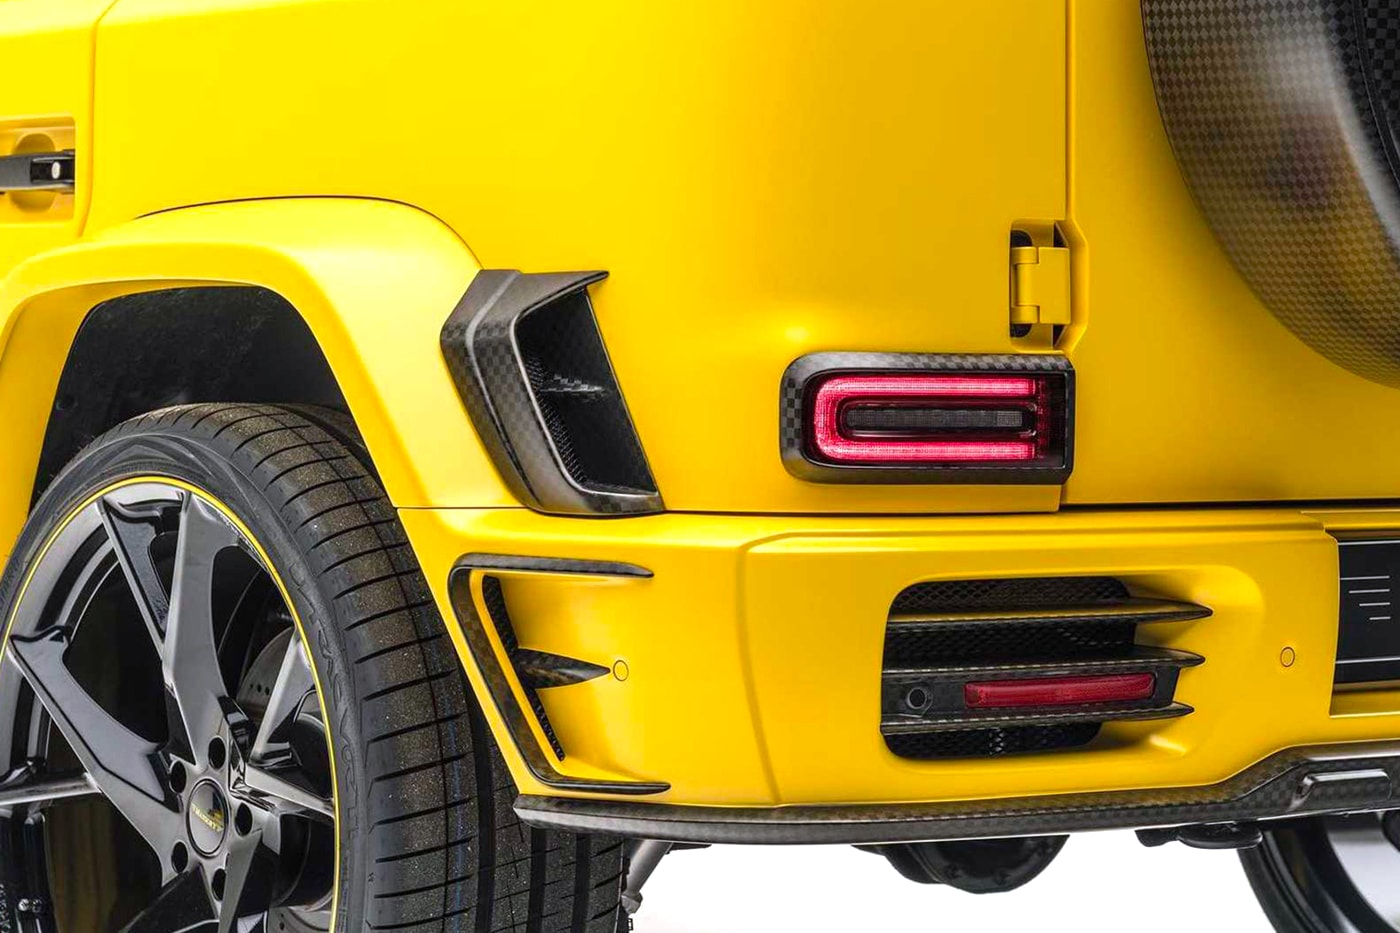 Mansory Gronos Mercedes-AMG G63 Matte Yellow bumblebee tuning premium SUV sports supercars carbon fiber 